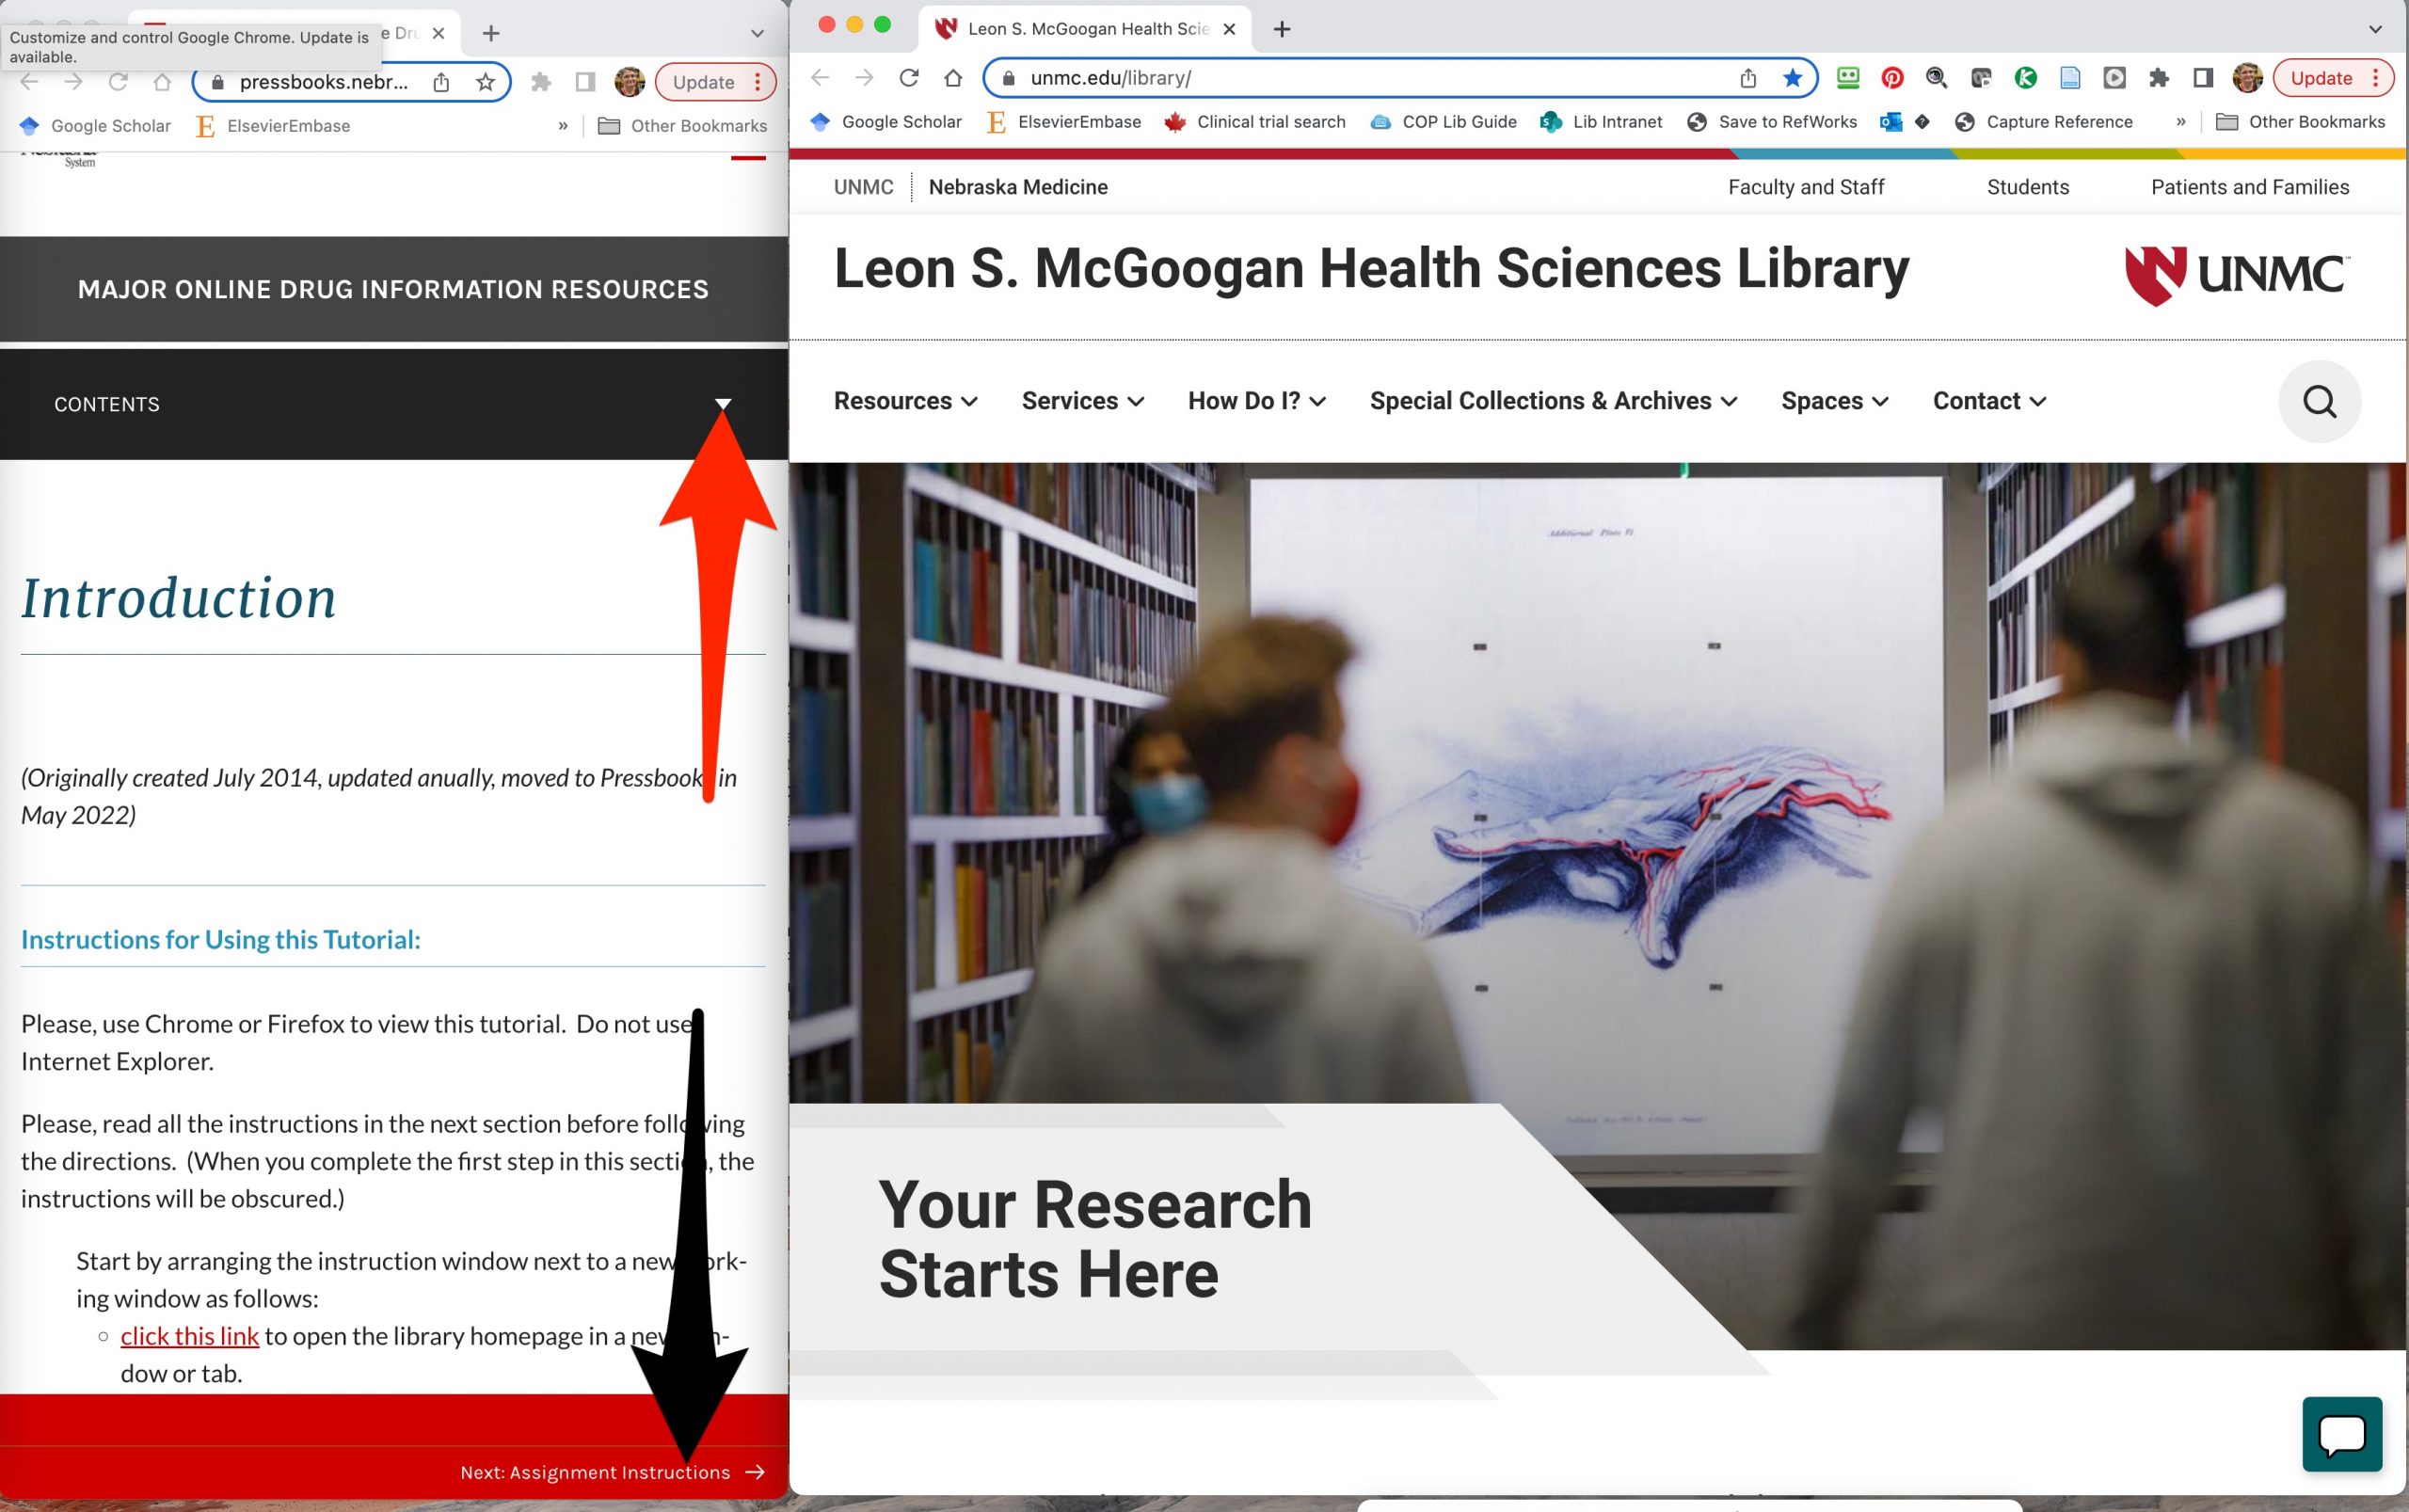 A screenshot shows the working and instruction windows side-by-side. Arrows point to the "Contents" links and "Next" chapter link in the instruction panel.